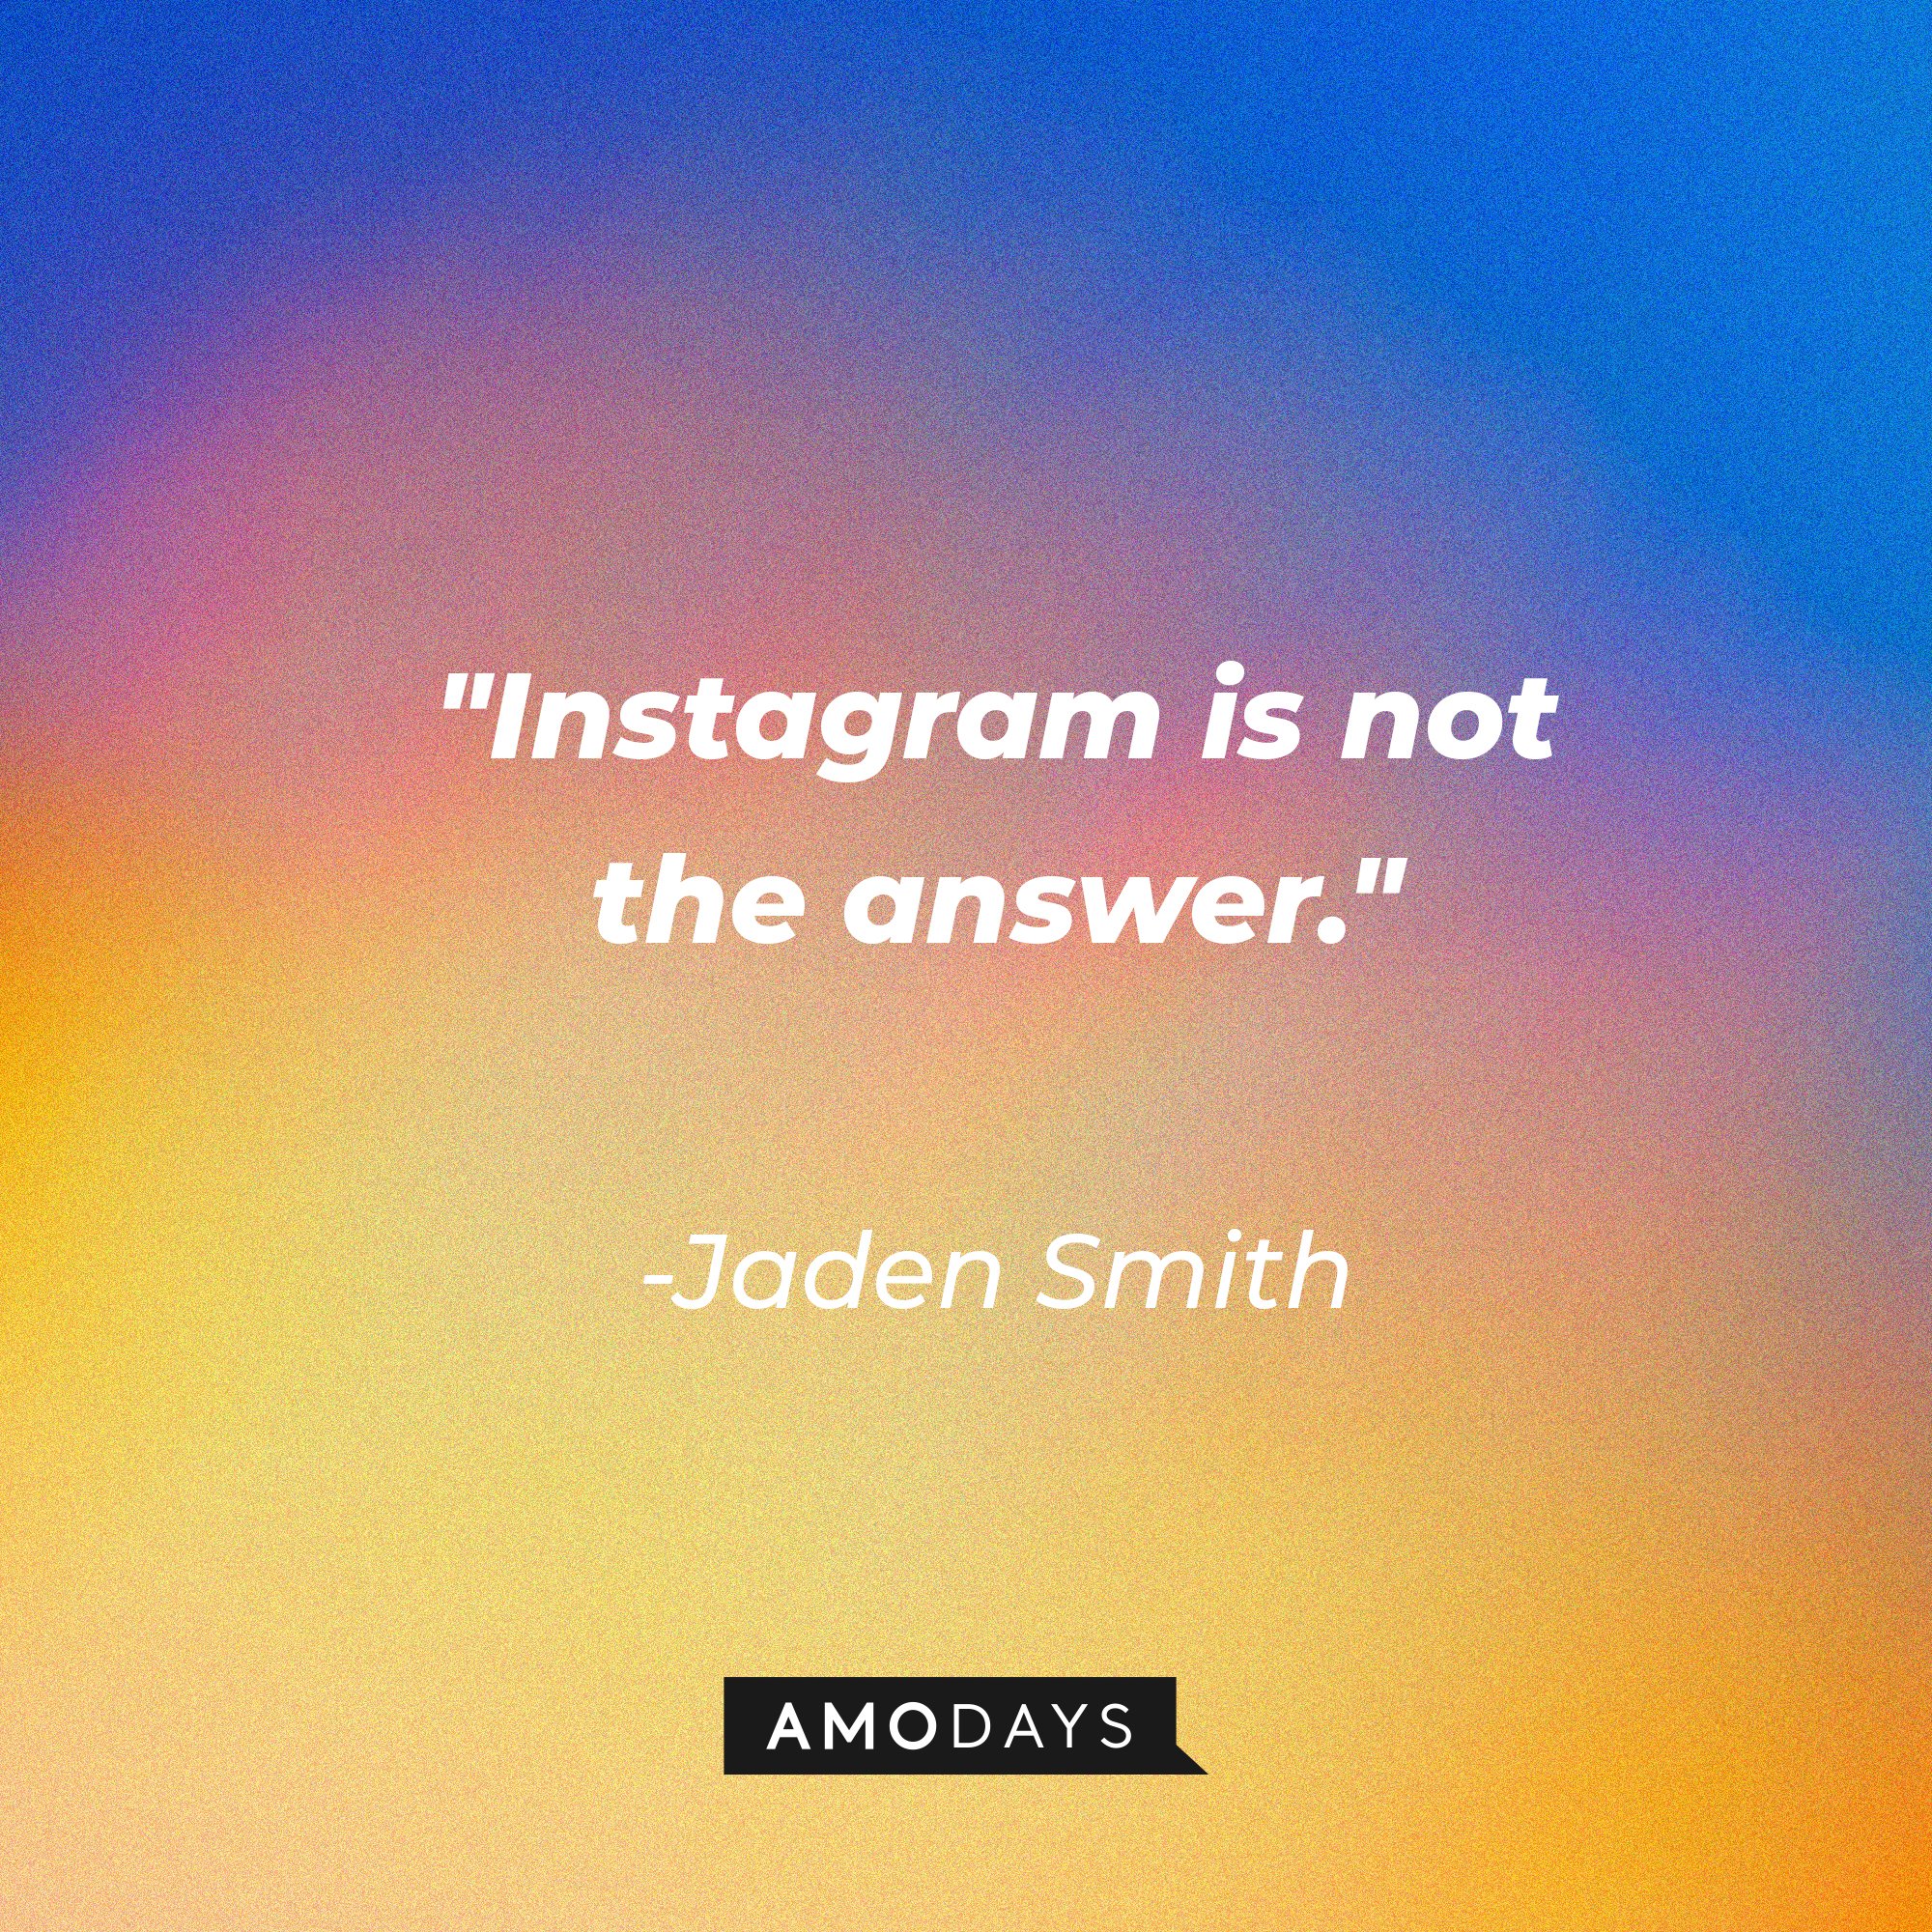 Jaden Smith's quote: "Instagram is not the answer." | Image: AmoDays